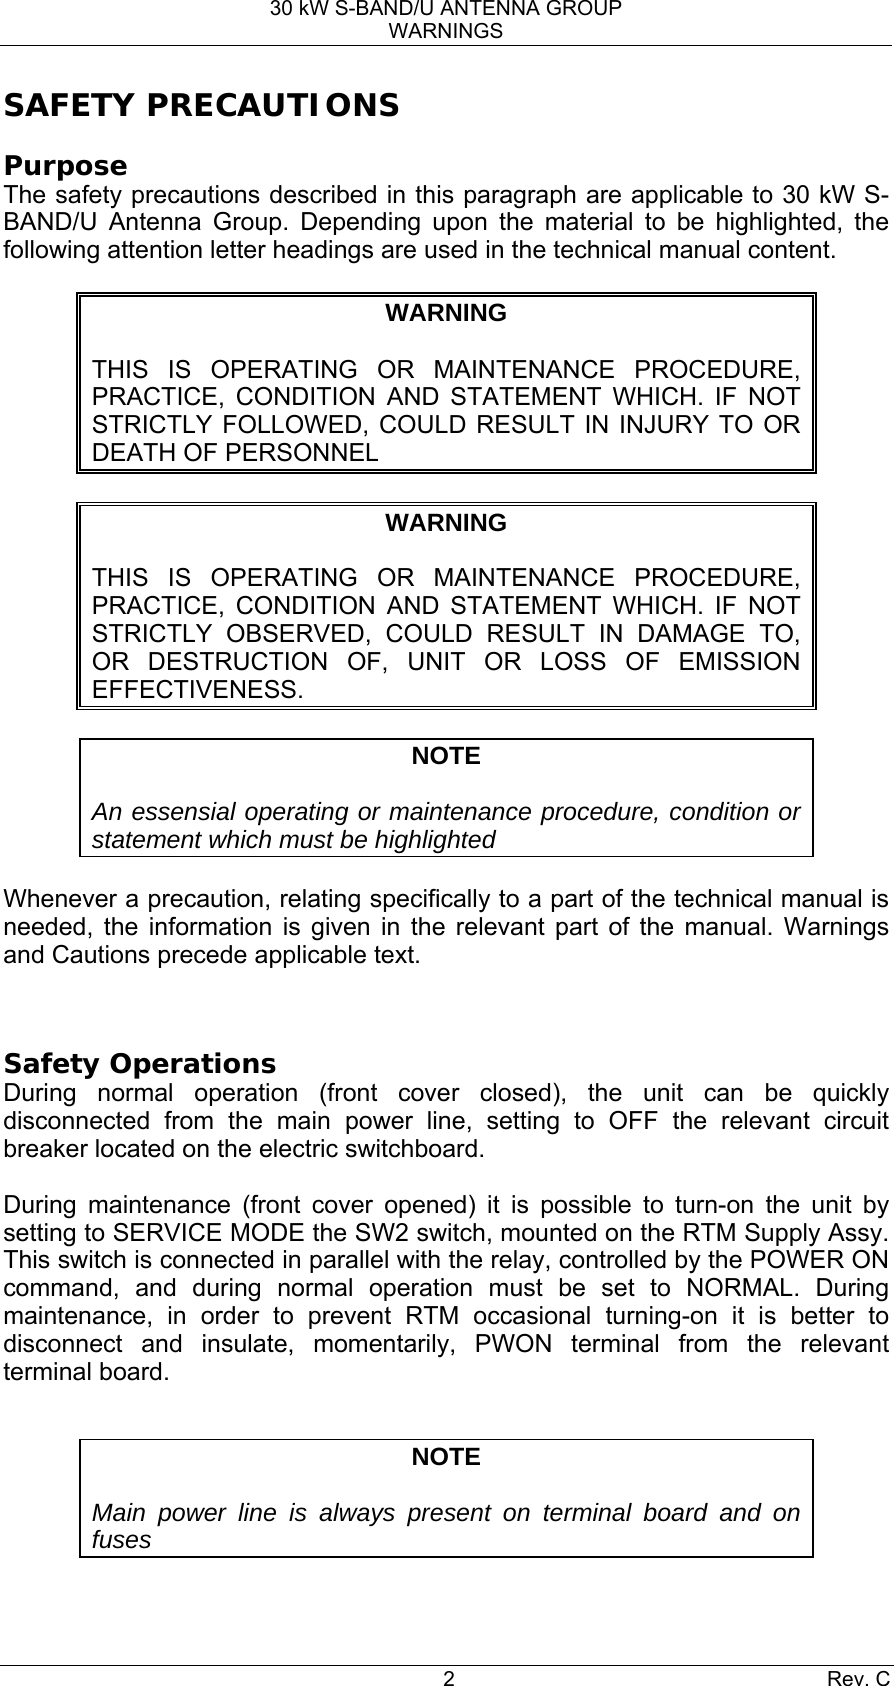 30 kW S-BAND/U ANTENNA GROUP WARNINGS 2 Rev. C SAFETY PRECAUTIONS Purpose The safety precautions described in this paragraph are applicable to 30 kW S-BAND/U Antenna Group. Depending upon the material to be highlighted, the following attention letter headings are used in the technical manual content.  WARNING  THIS IS OPERATING OR MAINTENANCE PROCEDURE, PRACTICE, CONDITION AND STATEMENT WHICH. IF NOT STRICTLY FOLLOWED, COULD RESULT IN INJURY TO OR DEATH OF PERSONNEL  WARNING  THIS IS OPERATING OR MAINTENANCE PROCEDURE, PRACTICE, CONDITION AND STATEMENT WHICH. IF NOT STRICTLY OBSERVED, COULD RESULT IN DAMAGE TO, OR DESTRUCTION OF, UNIT OR LOSS OF EMISSION EFFECTIVENESS.  NOTE  An essensial operating or maintenance procedure, condition or statement which must be highlighted  Whenever a precaution, relating specifically to a part of the technical manual is needed, the information is given in the relevant part of the manual. Warnings and Cautions precede applicable text.  Safety Operations During normal operation (front cover closed), the unit can be quickly disconnected from the main power line, setting to OFF the relevant circuit breaker located on the electric switchboard.  During maintenance (front cover opened) it is possible to turn-on the unit by setting to SERVICE MODE the SW2 switch, mounted on the RTM Supply Assy. This switch is connected in parallel with the relay, controlled by the POWER ON command, and during normal operation must be set to NORMAL. During maintenance, in order to prevent RTM occasional turning-on it is better to disconnect and insulate, momentarily, PWON terminal from the relevant terminal board.  NOTE  Main power line is always present on terminal board and on fuses 